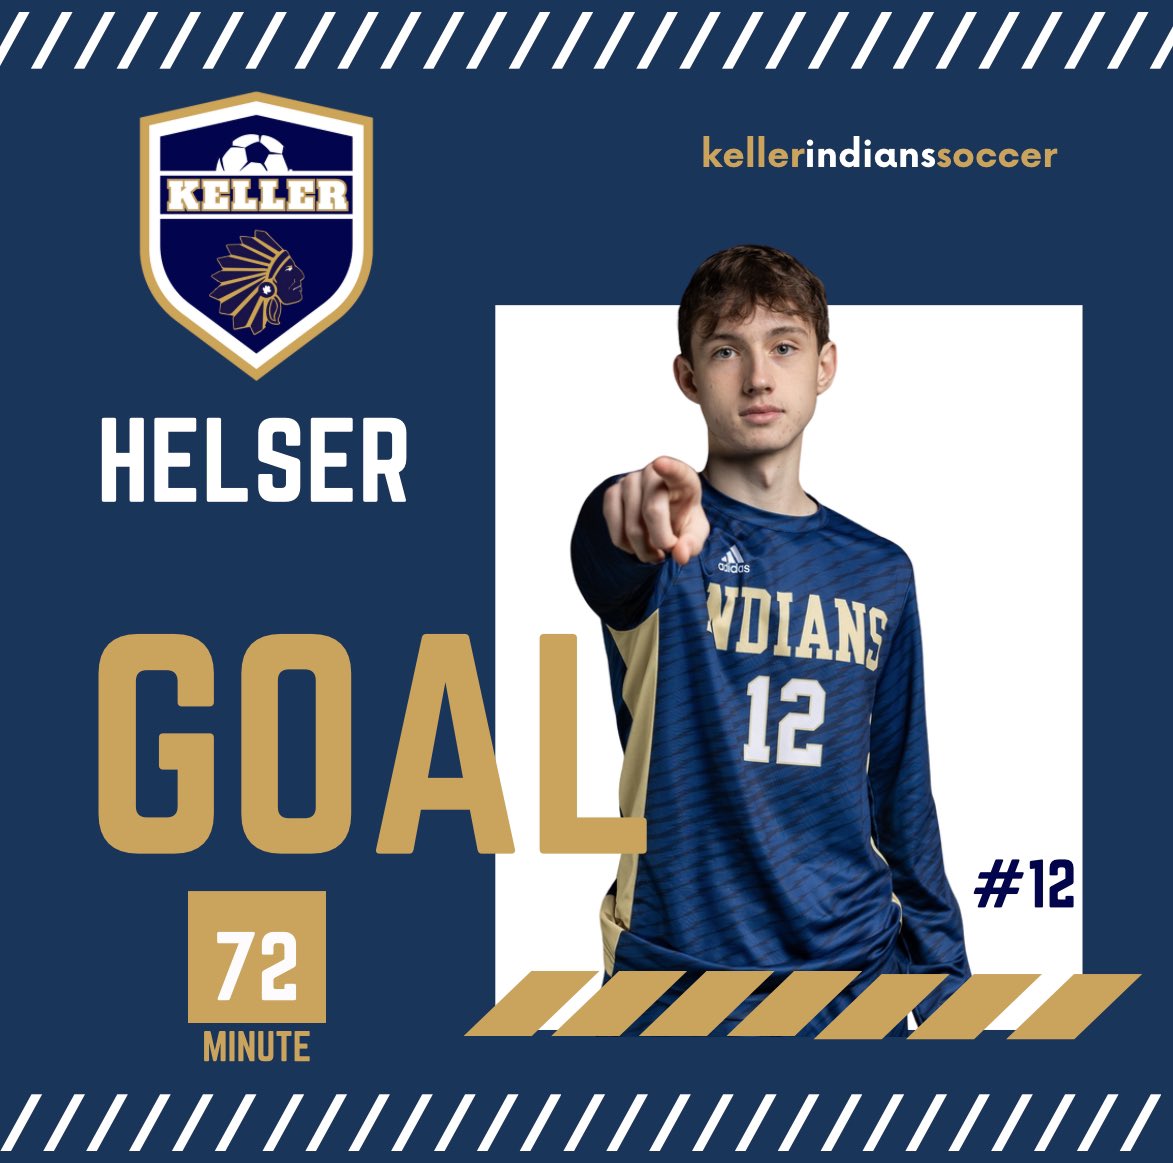 A first goal of the season for 1️⃣2️⃣!! Helser makes it 5-2